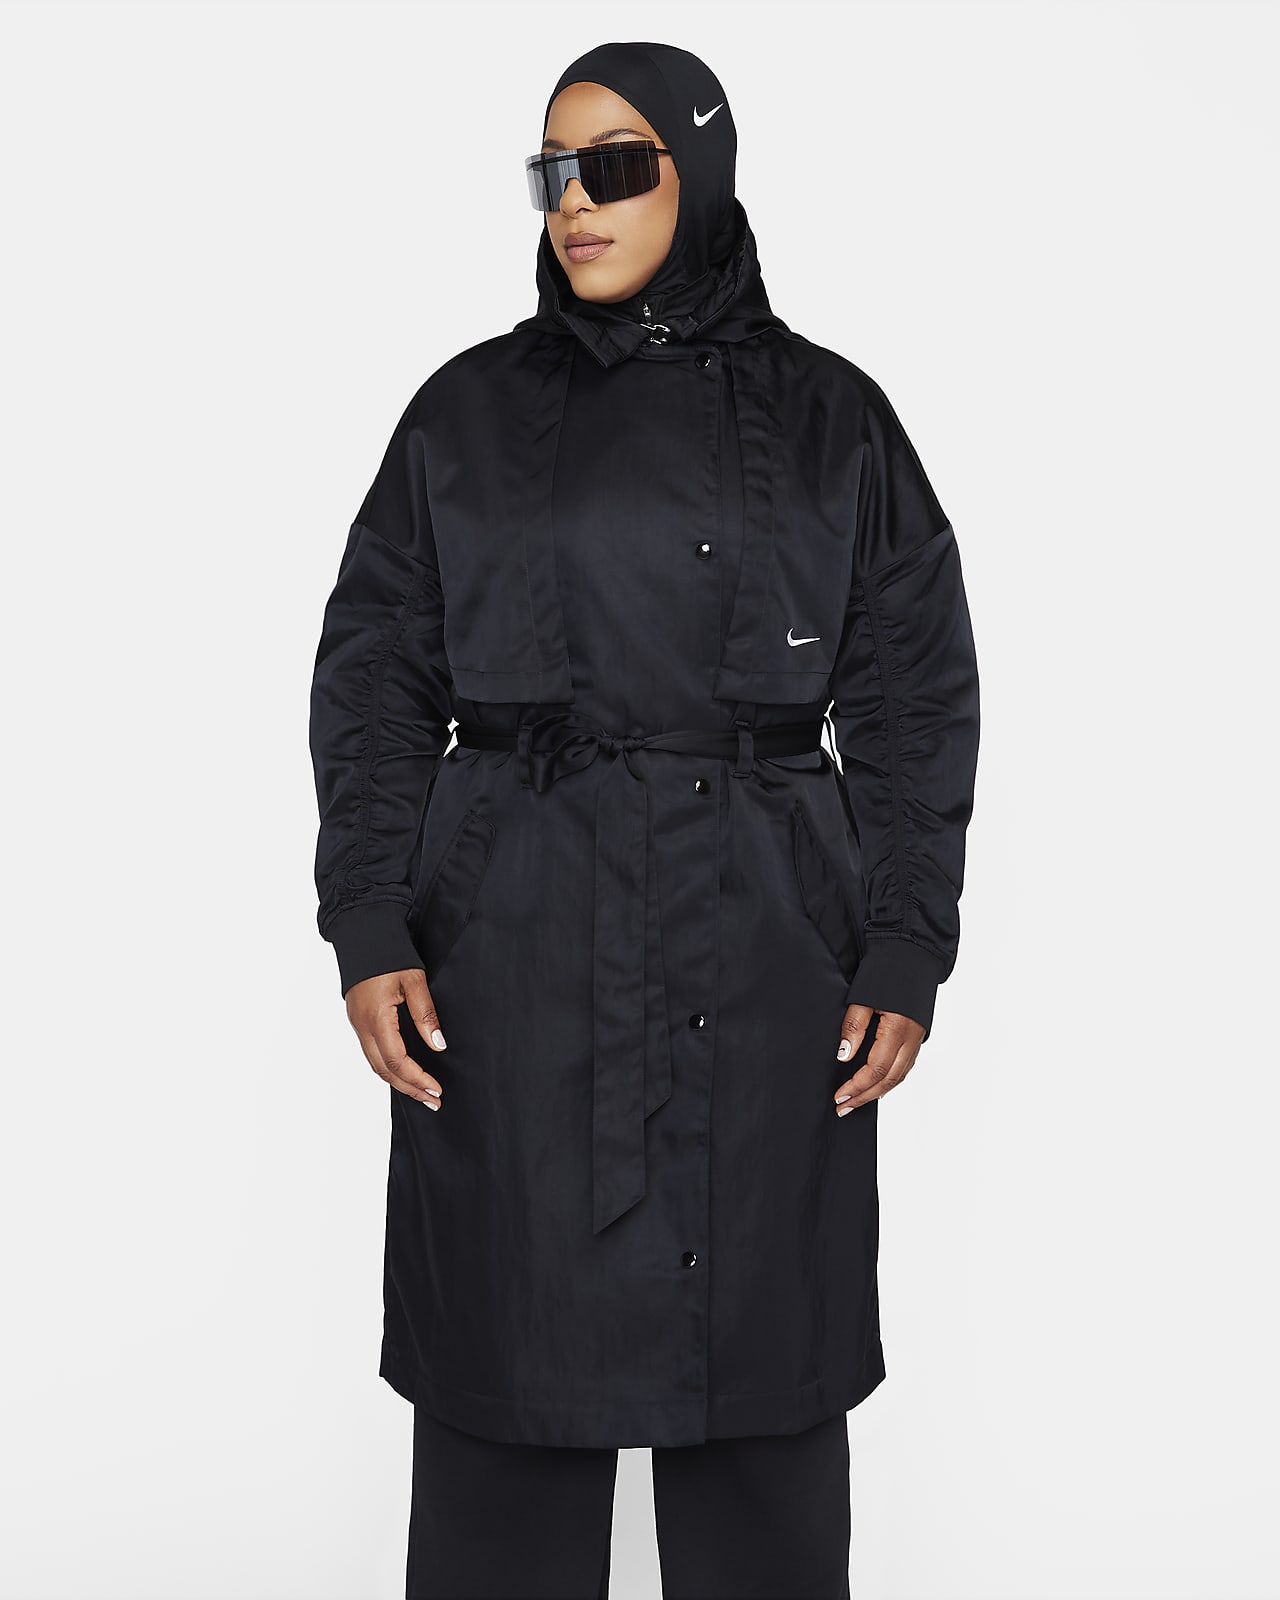 sacai Nike Trench Jacket DQ9027-010 Release Date